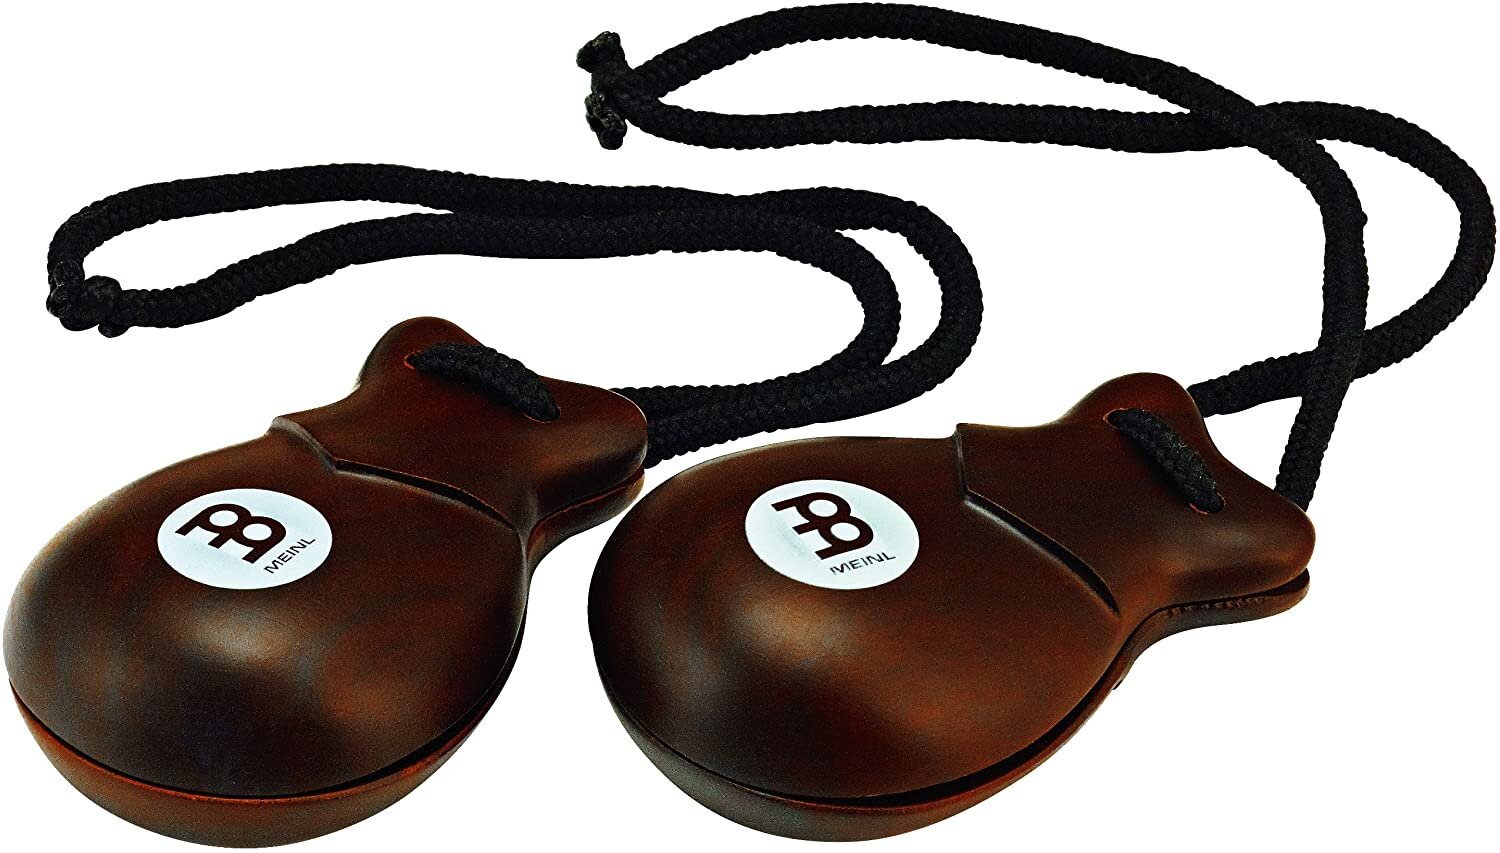 Meinl Castanets Concert Rosewood (FC2) : photo 1